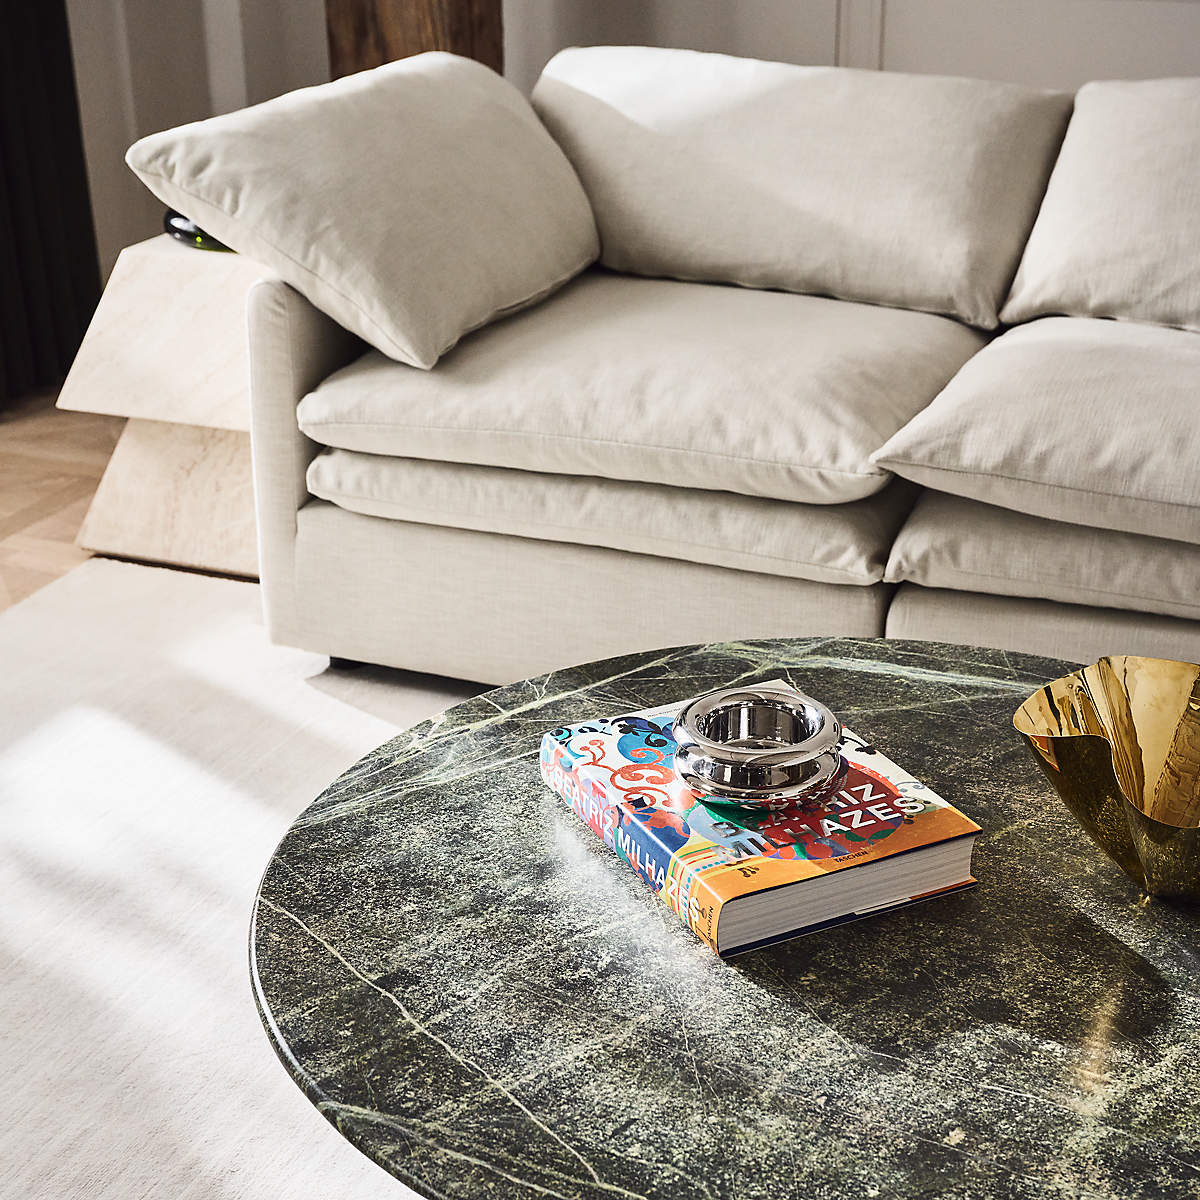 Colorful coffee table book on green marble table